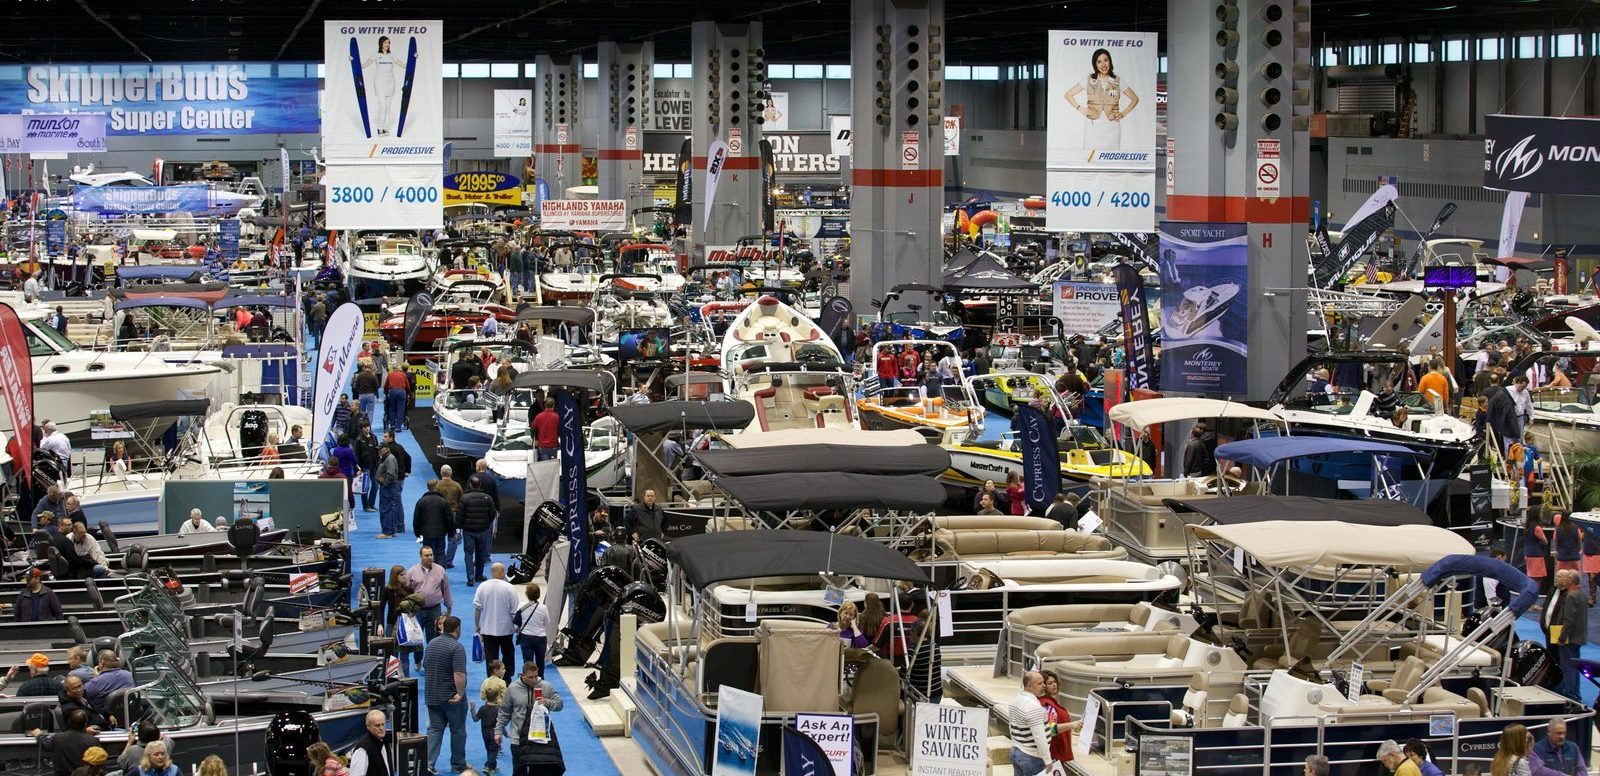 Show floor of the Chicago Boat Show.